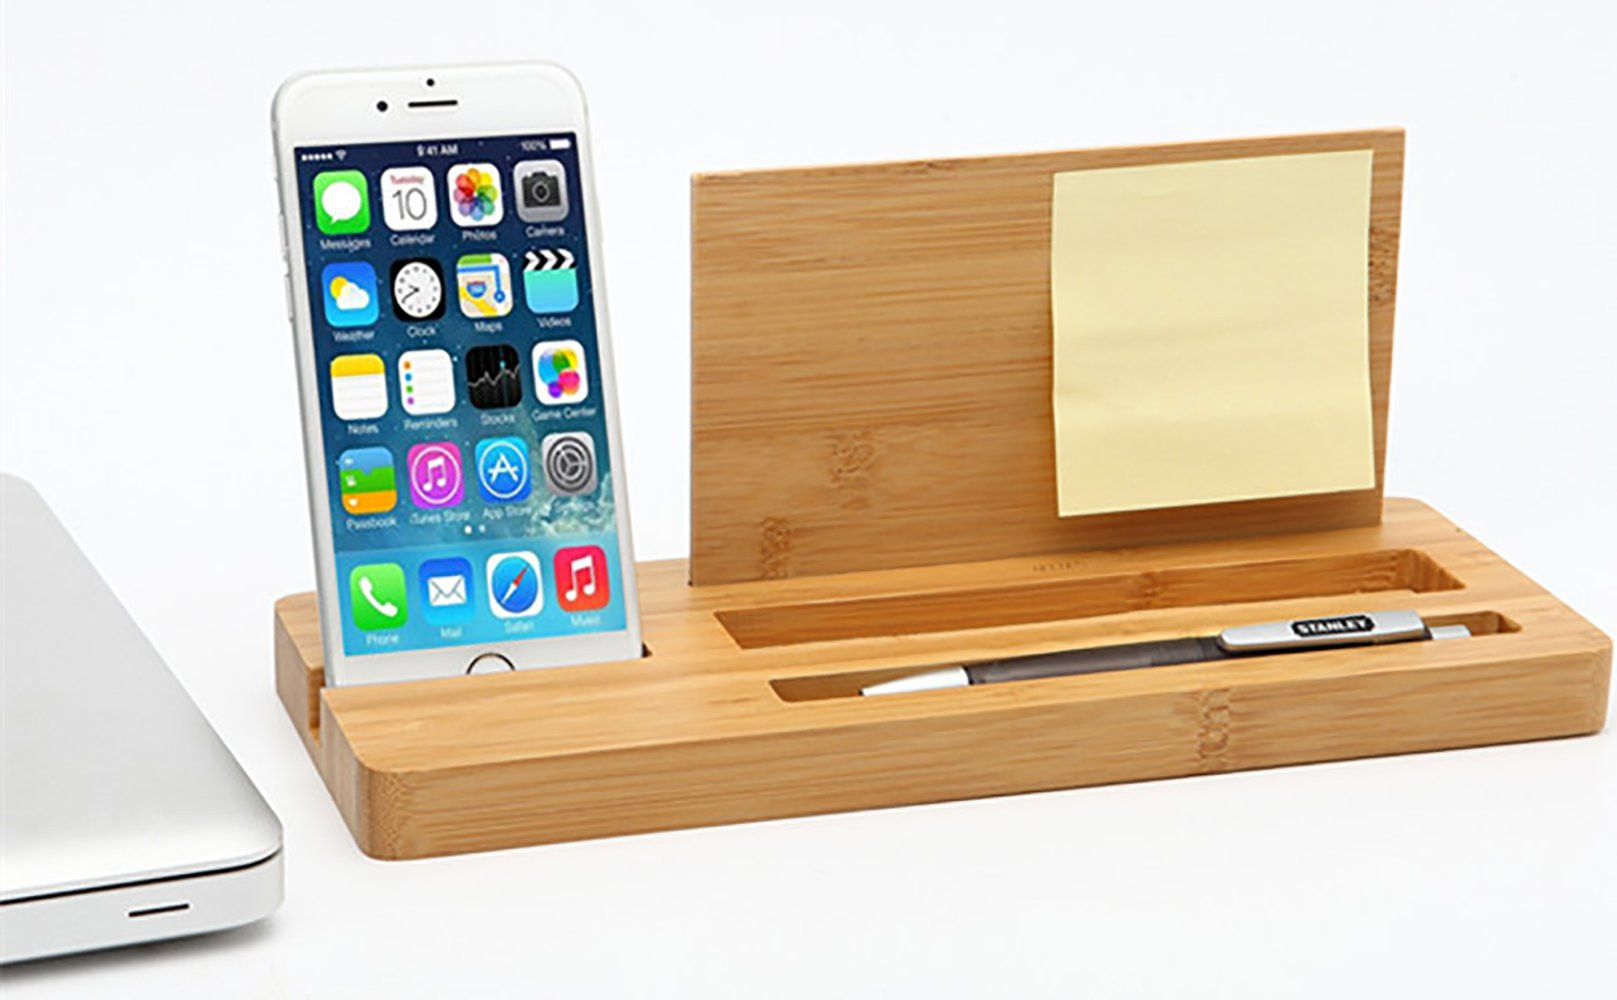 Bamboo Desk Organizer
 Bamboo Wood Small Desk Organizer with 4 Slot Phone Stand